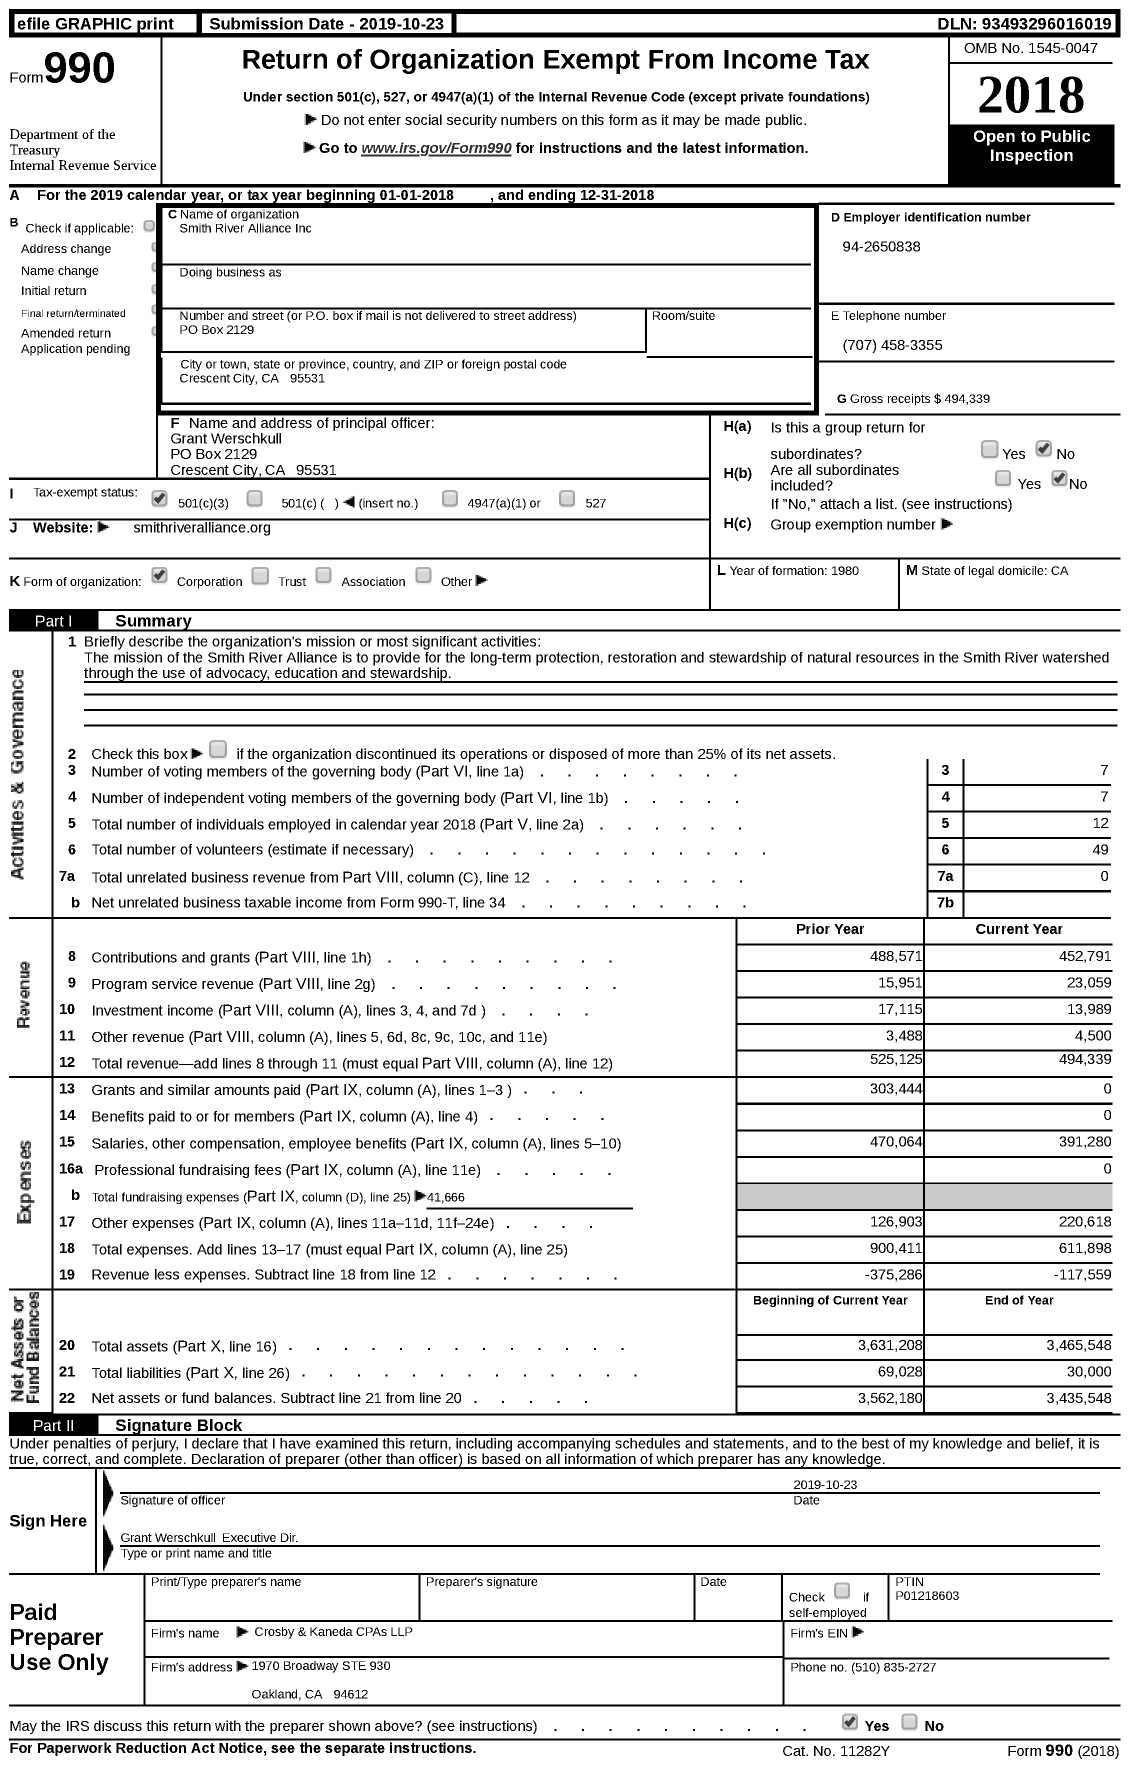 Image of first page of 2018 Form 990 for Smith River Alliance (SRA)